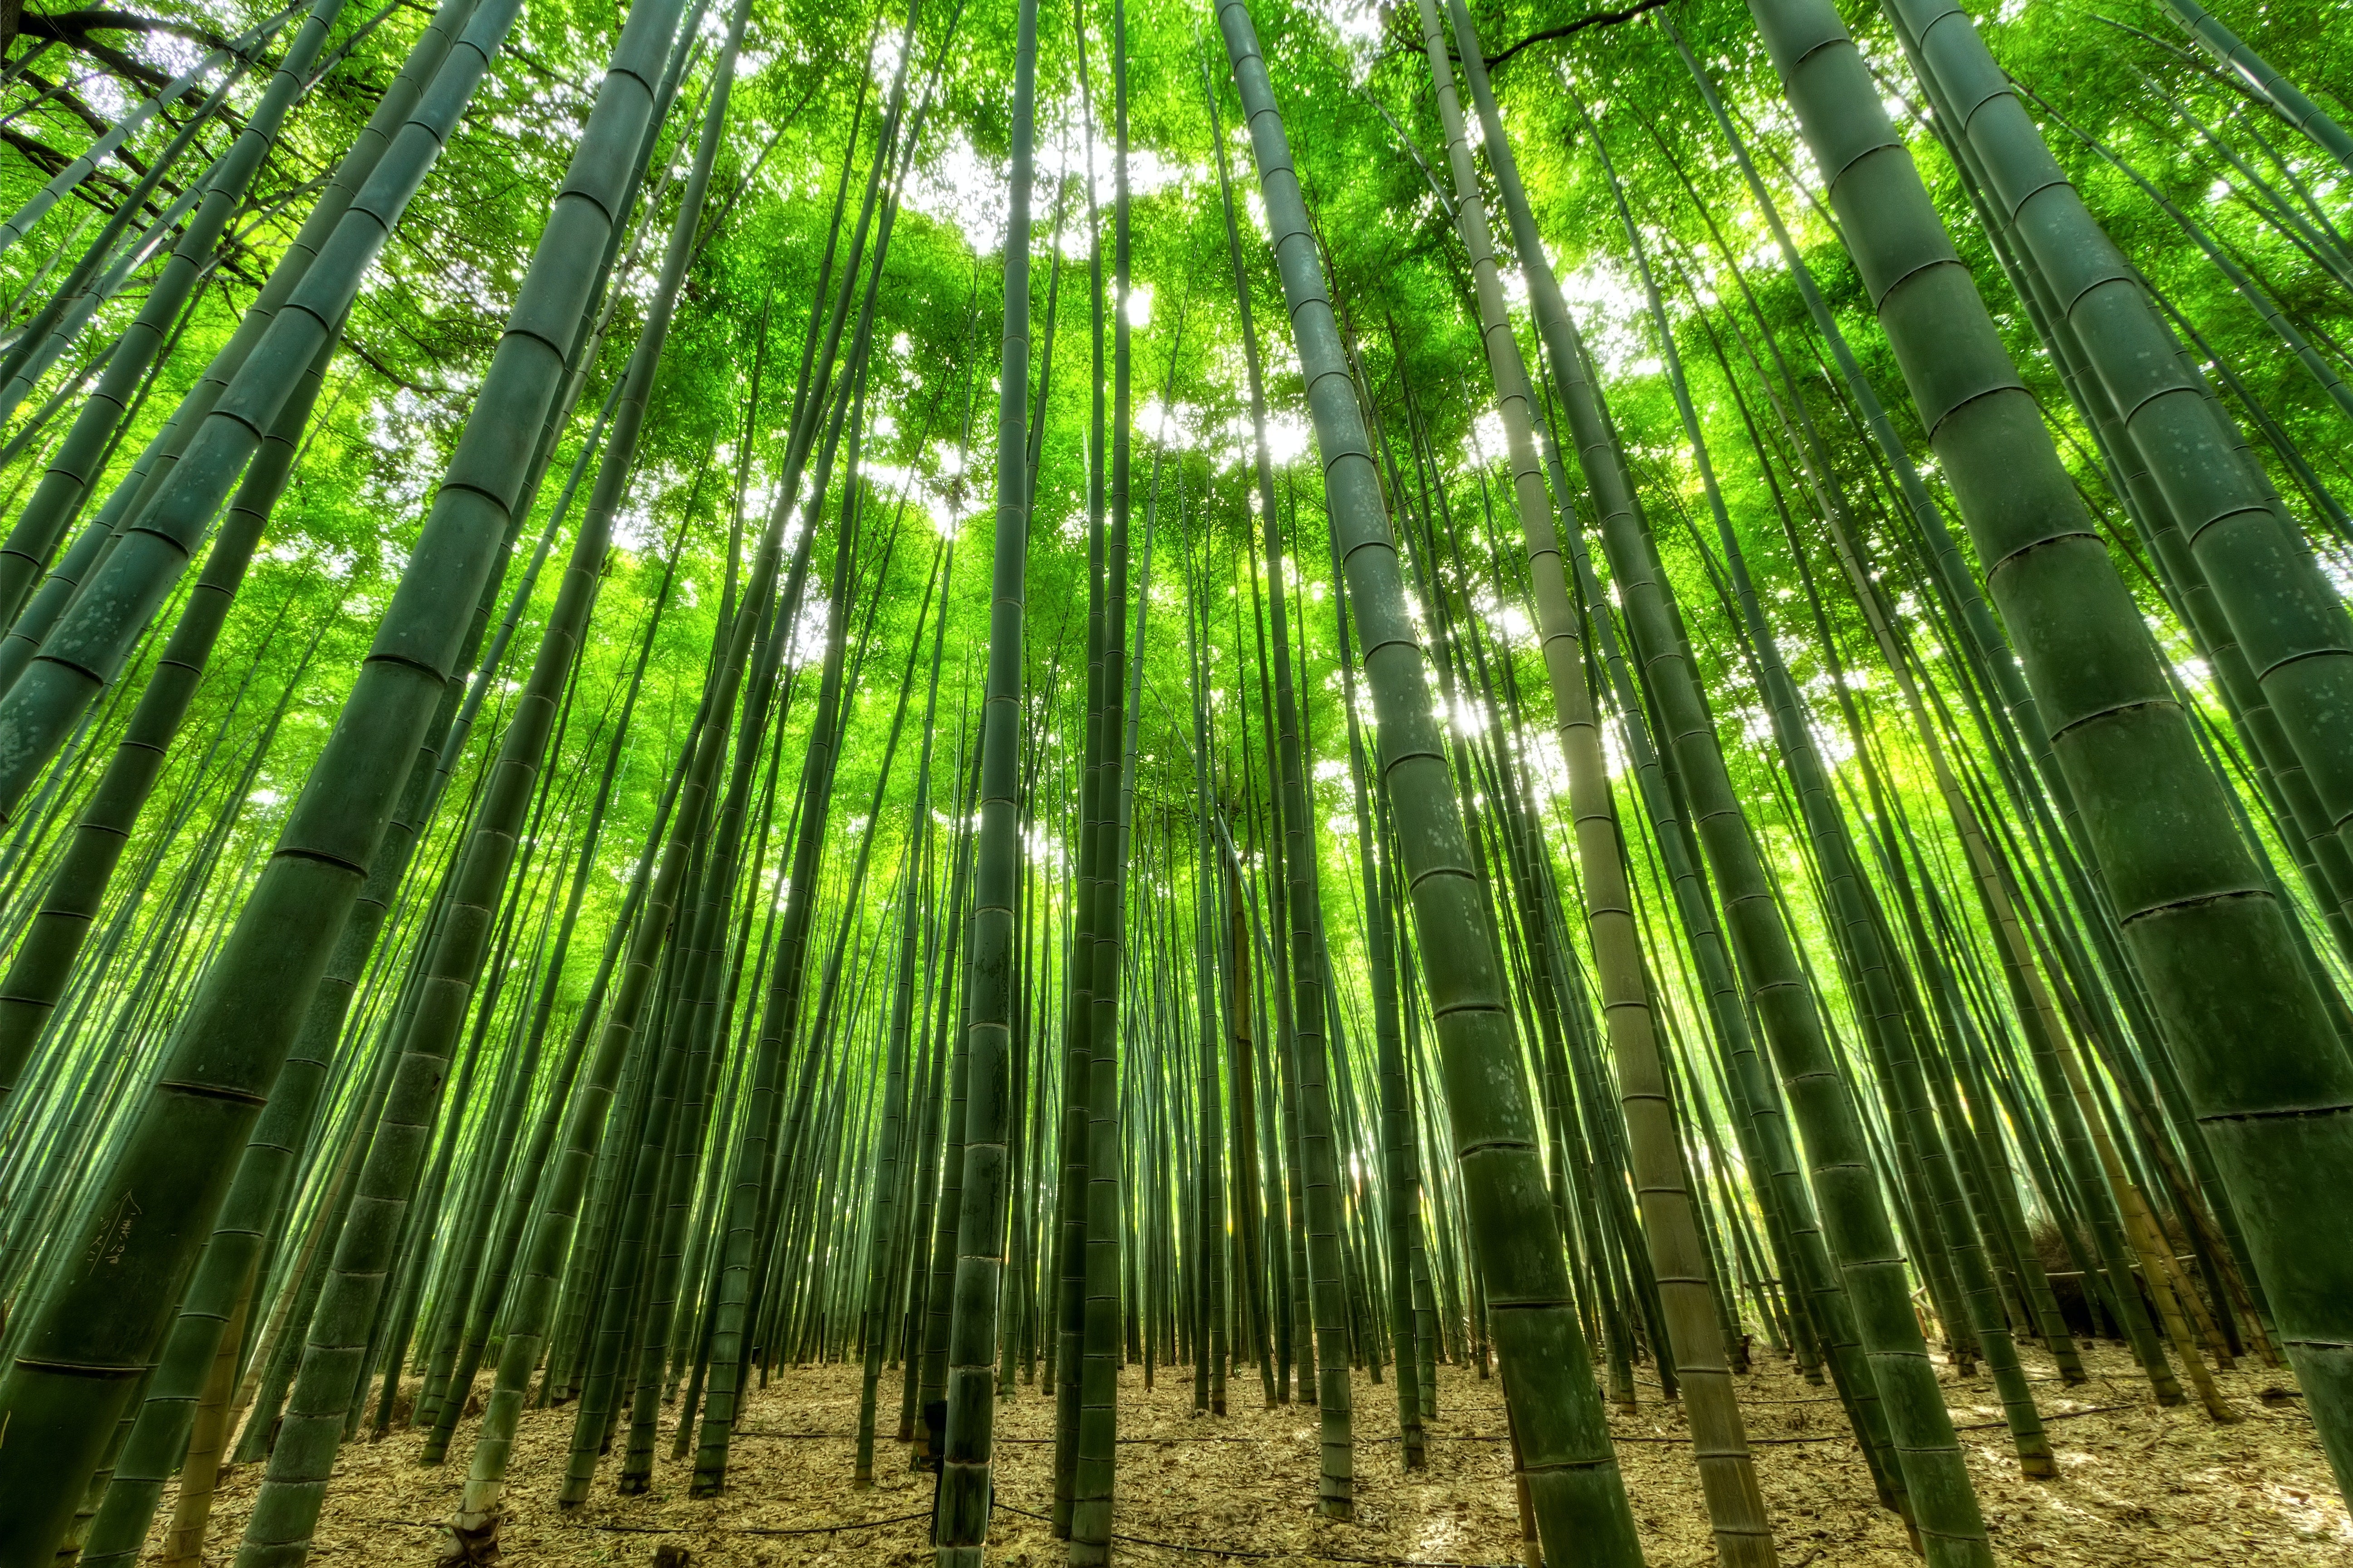 Bamboo Forest with sunlight peeking through the trees